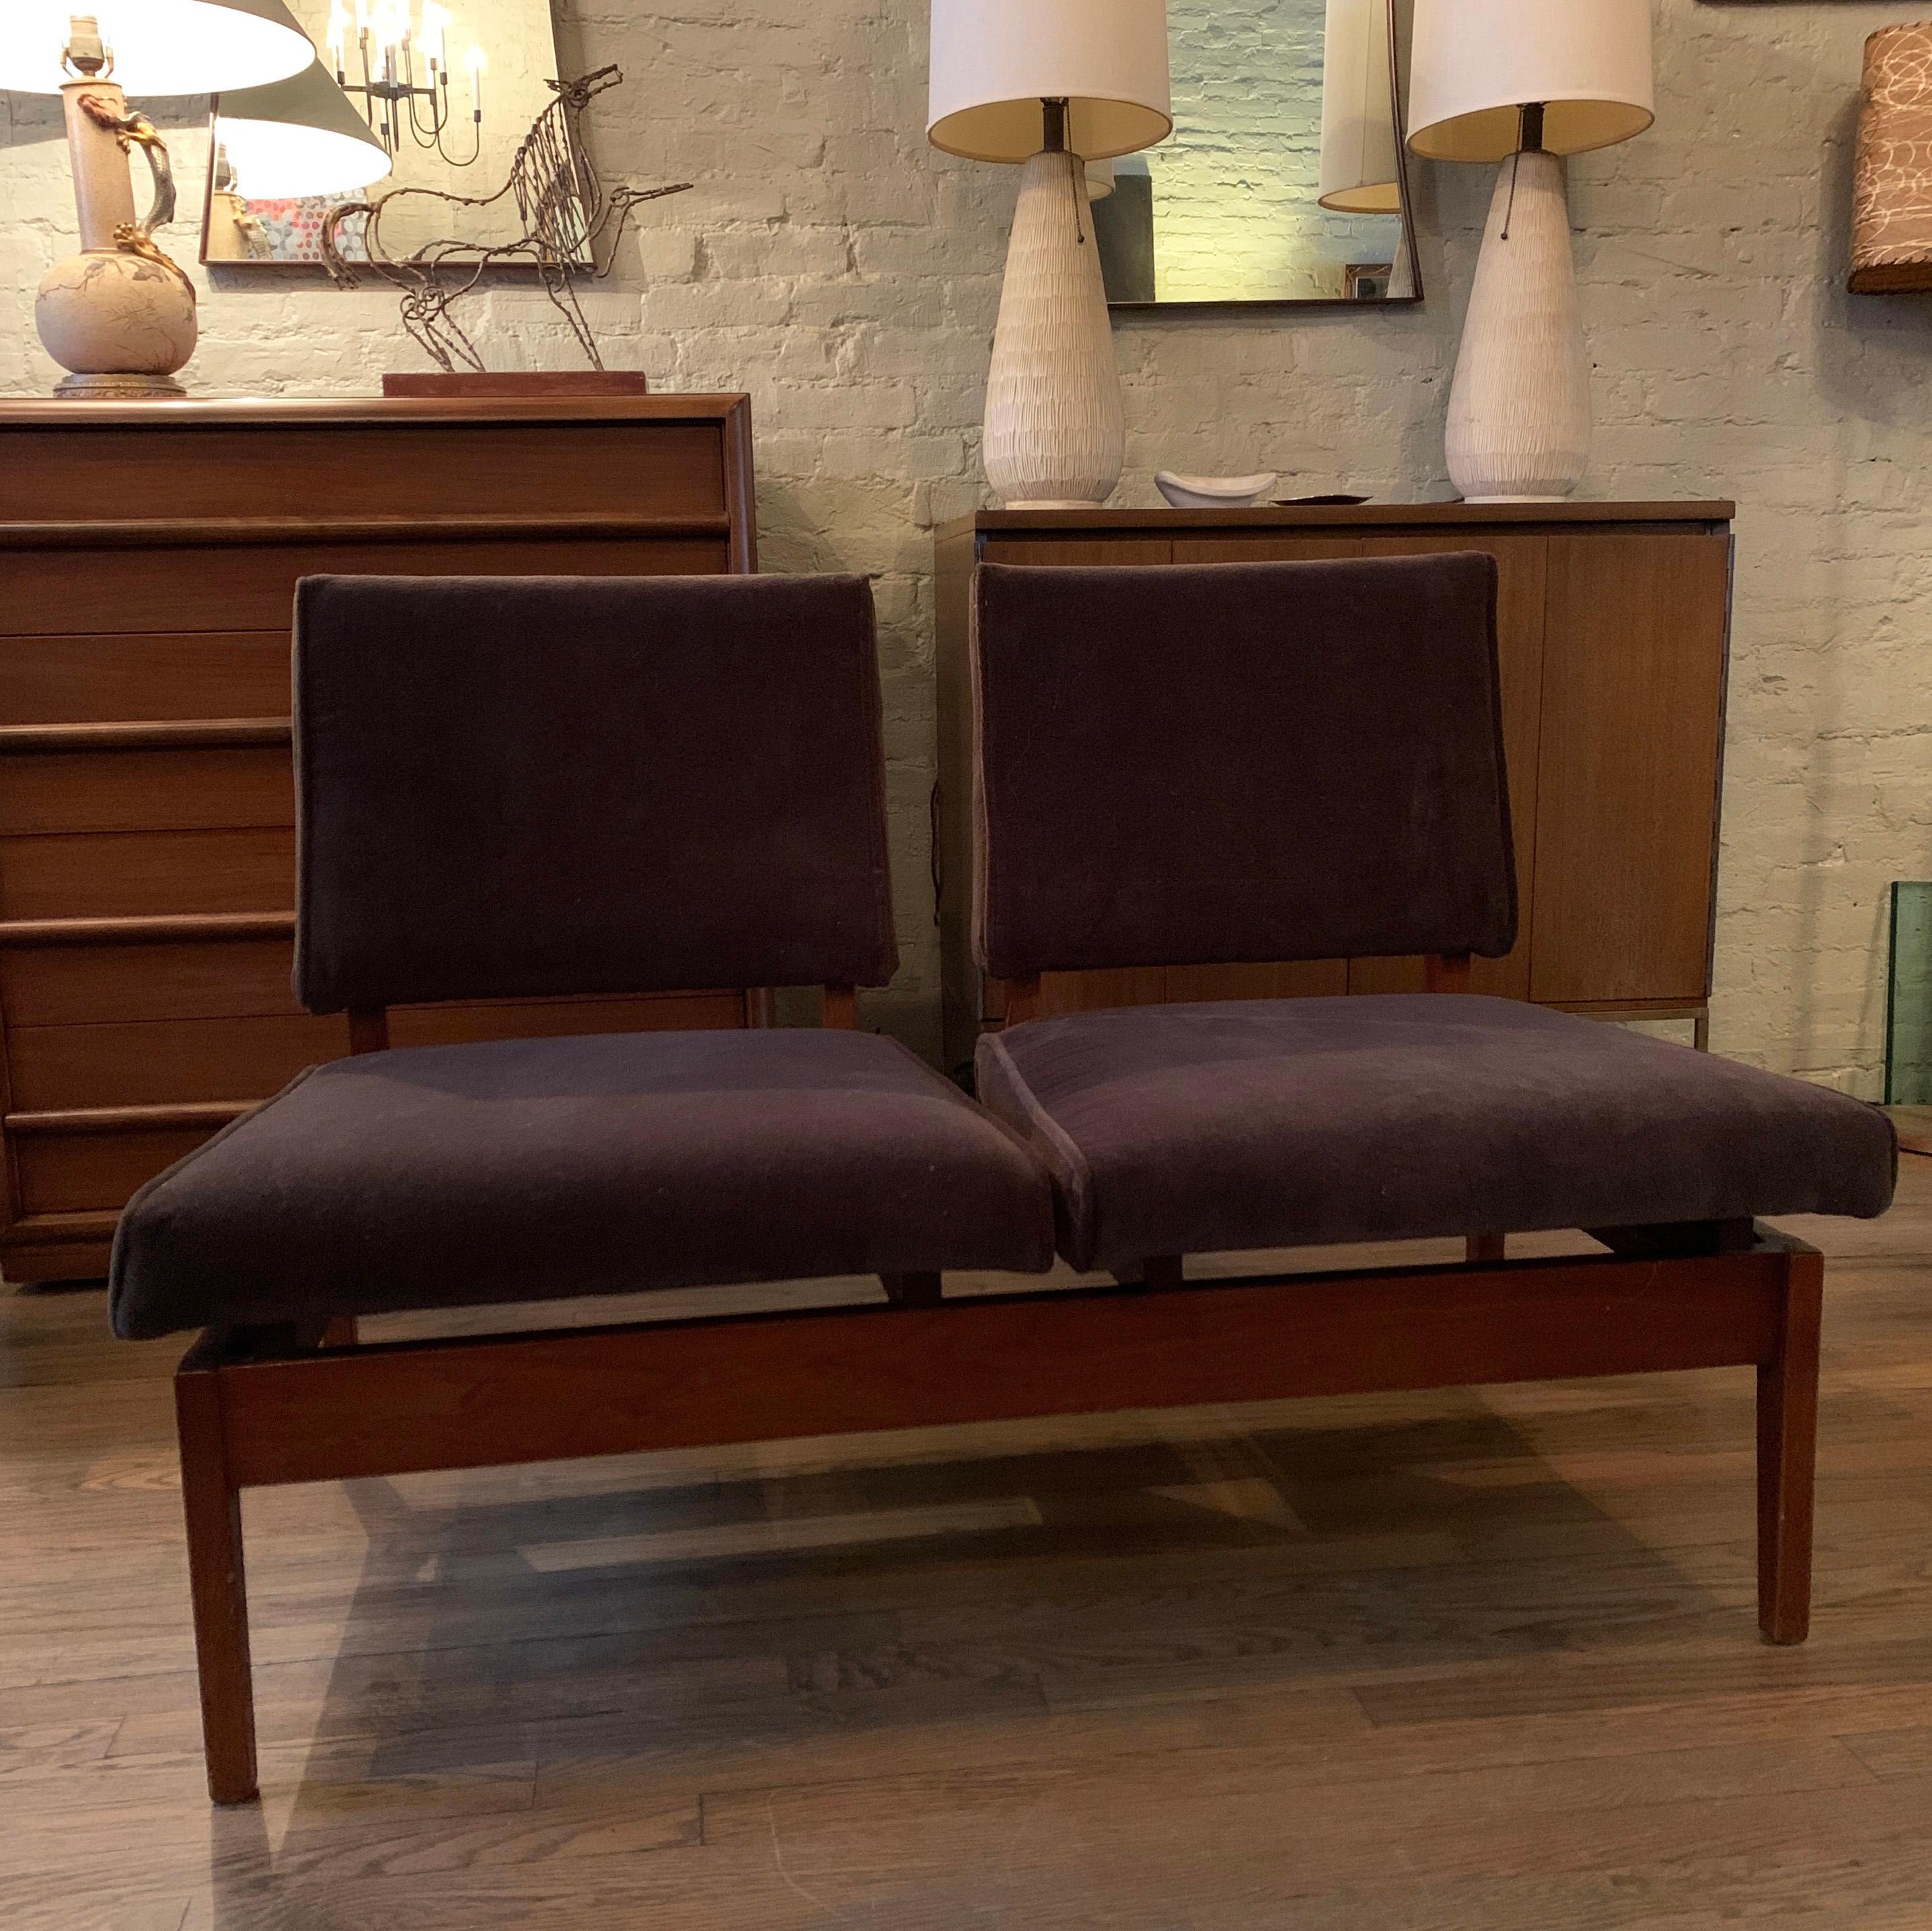 Mid-Century Modern, settee or loveseat features a floating walnut frame with chocolate brown velvet upholstery.